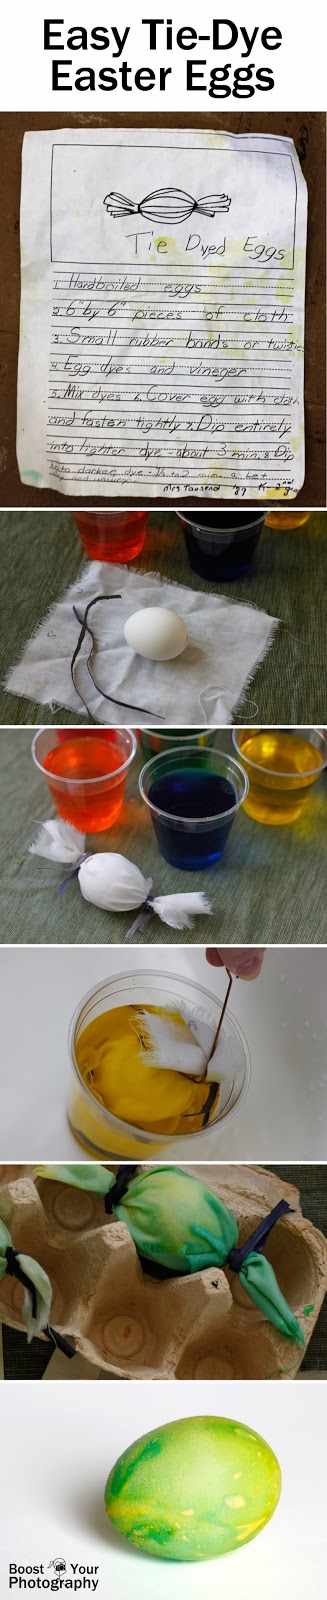 Easy Tie-Dye Easter Eggs | Boost Your Photography